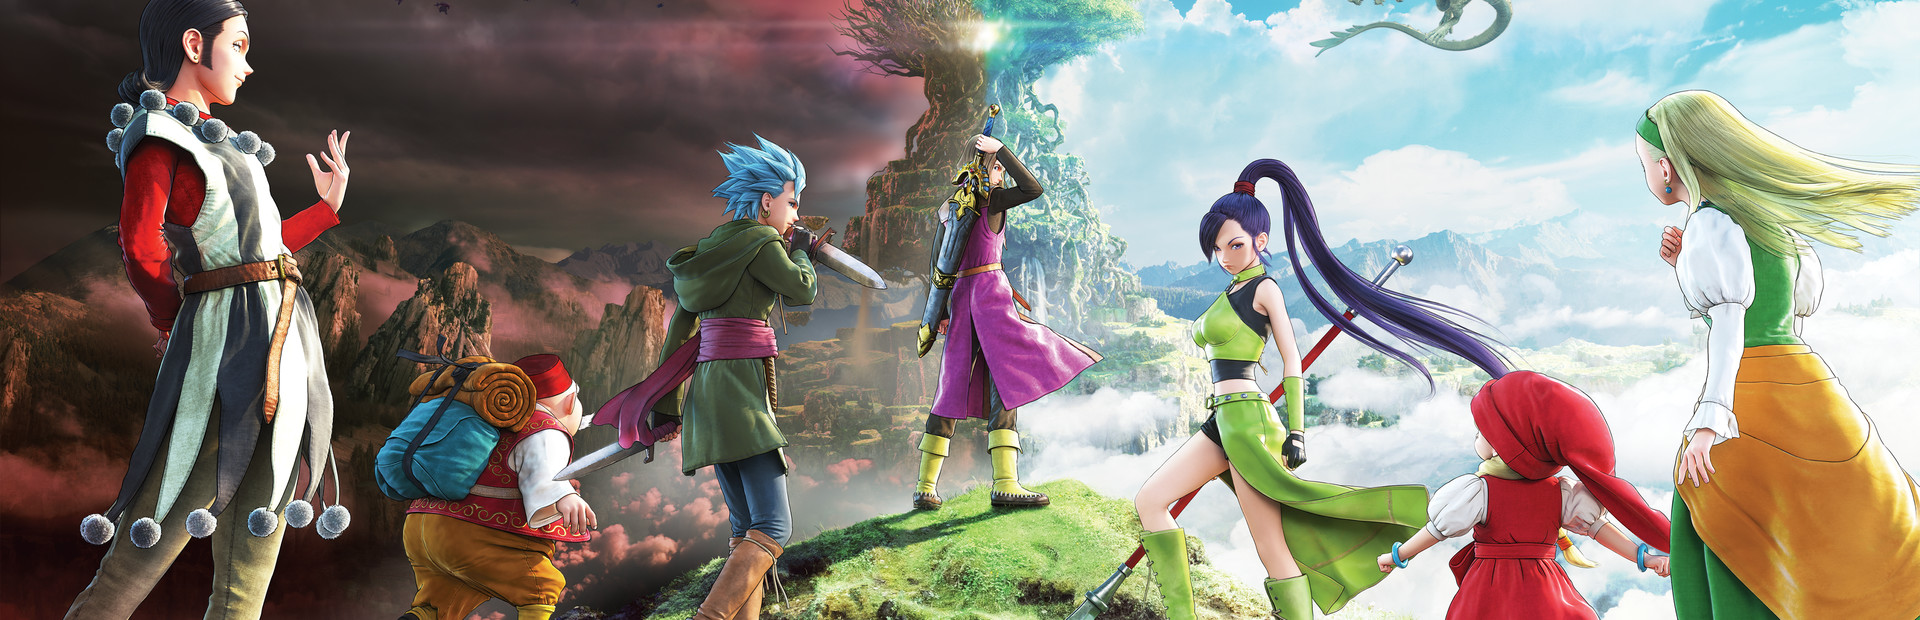 DRAGON QUEST® XI: Echoes of an Elusive Age™ - Digital Edition of Light cover image